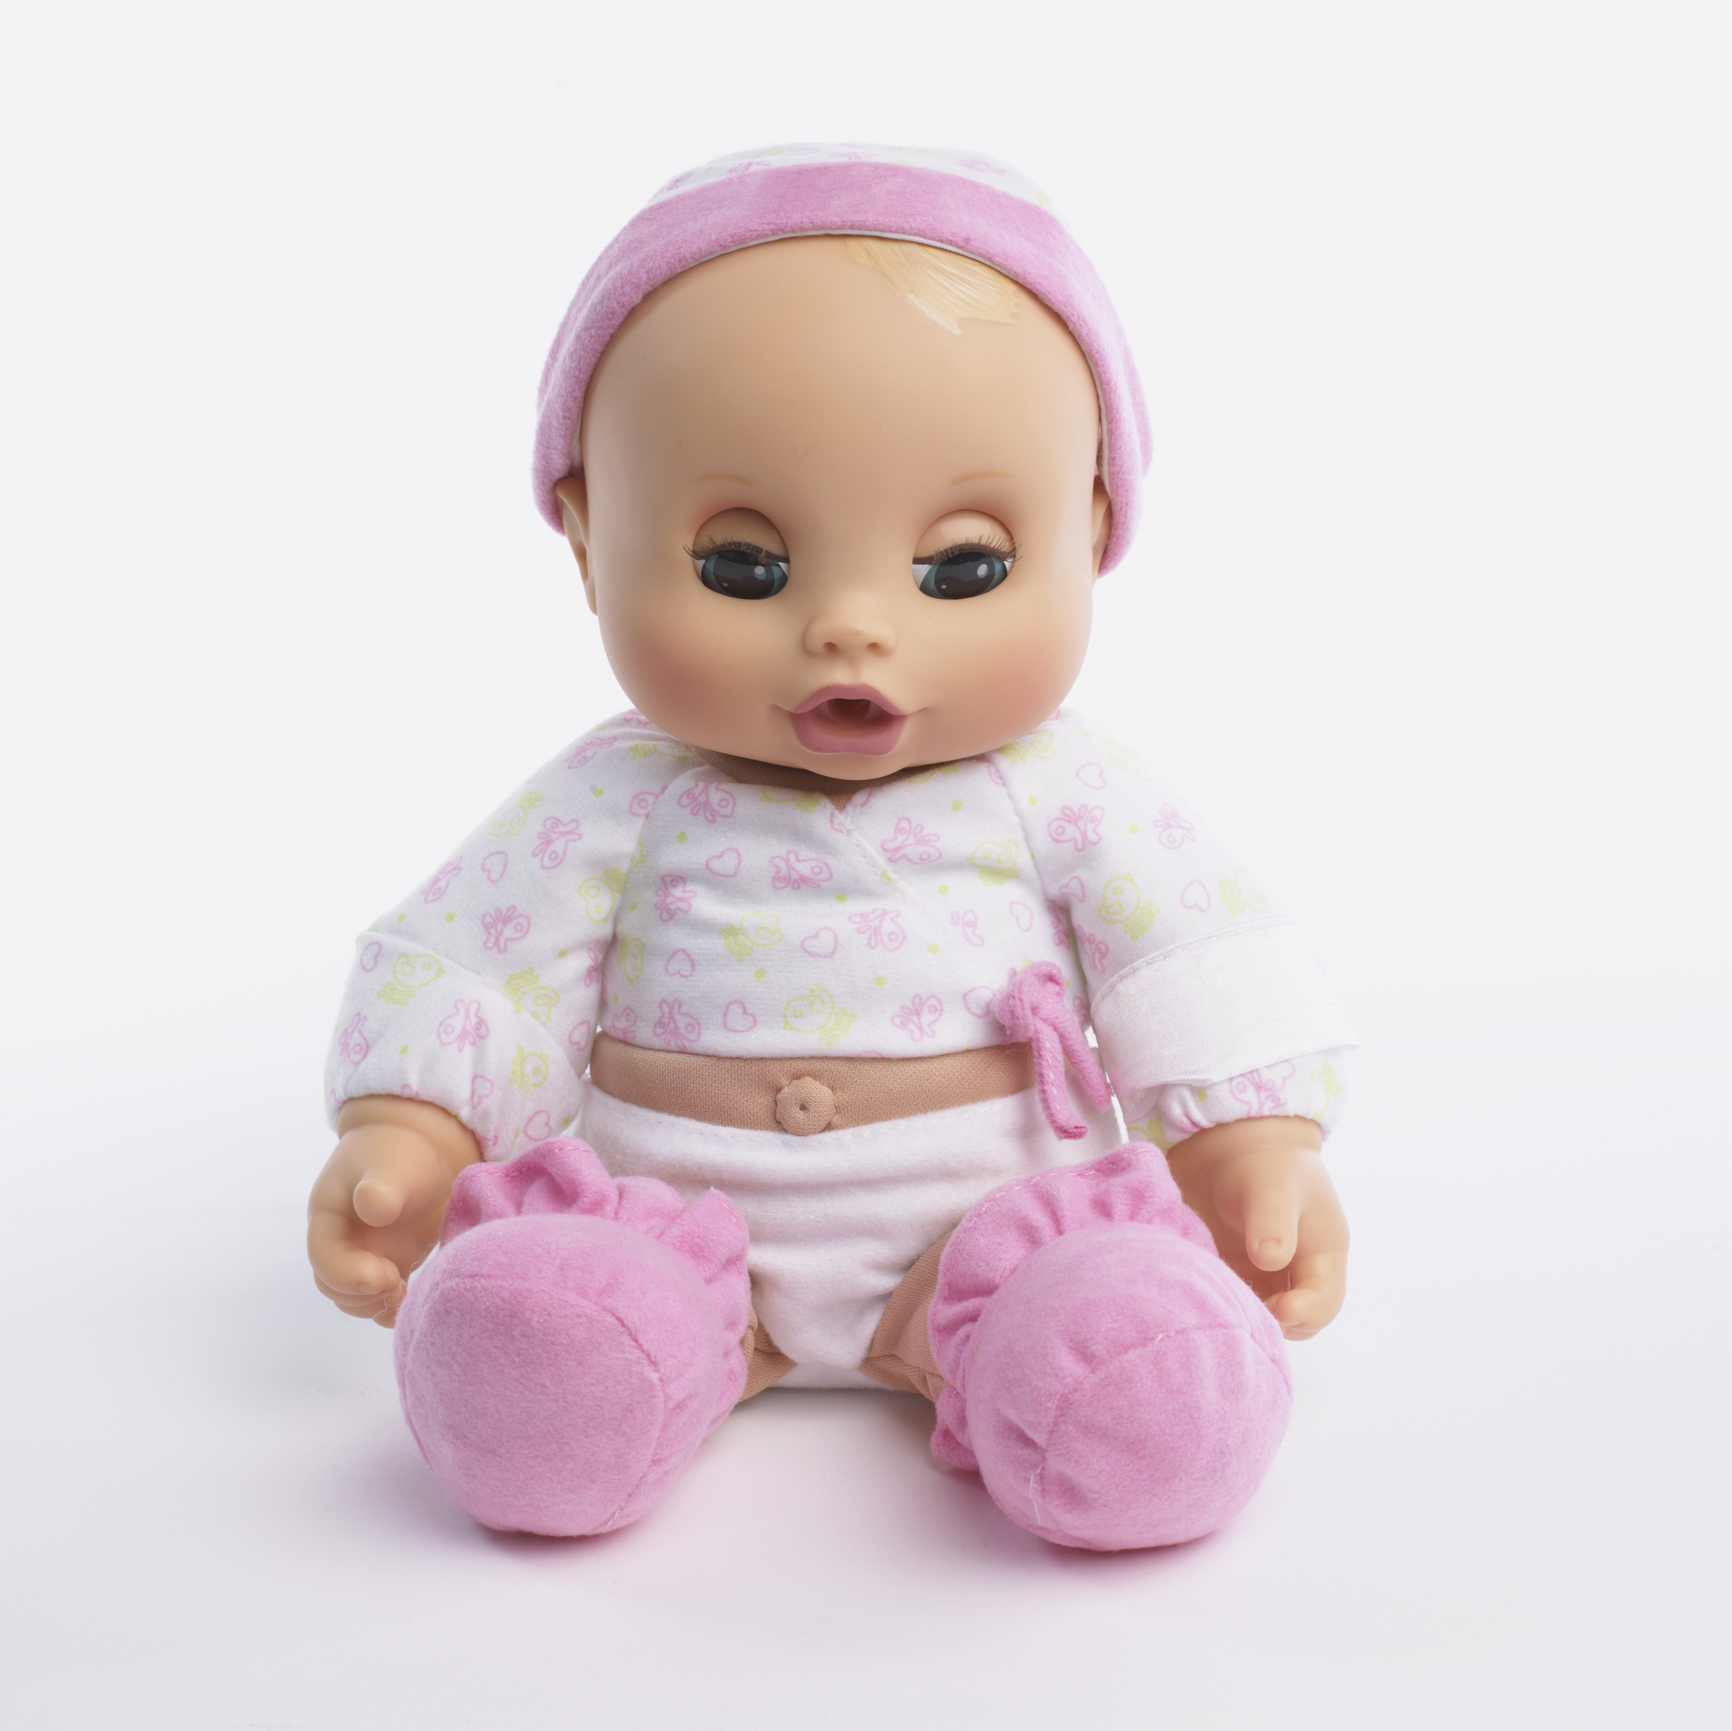 Baby doll, front view